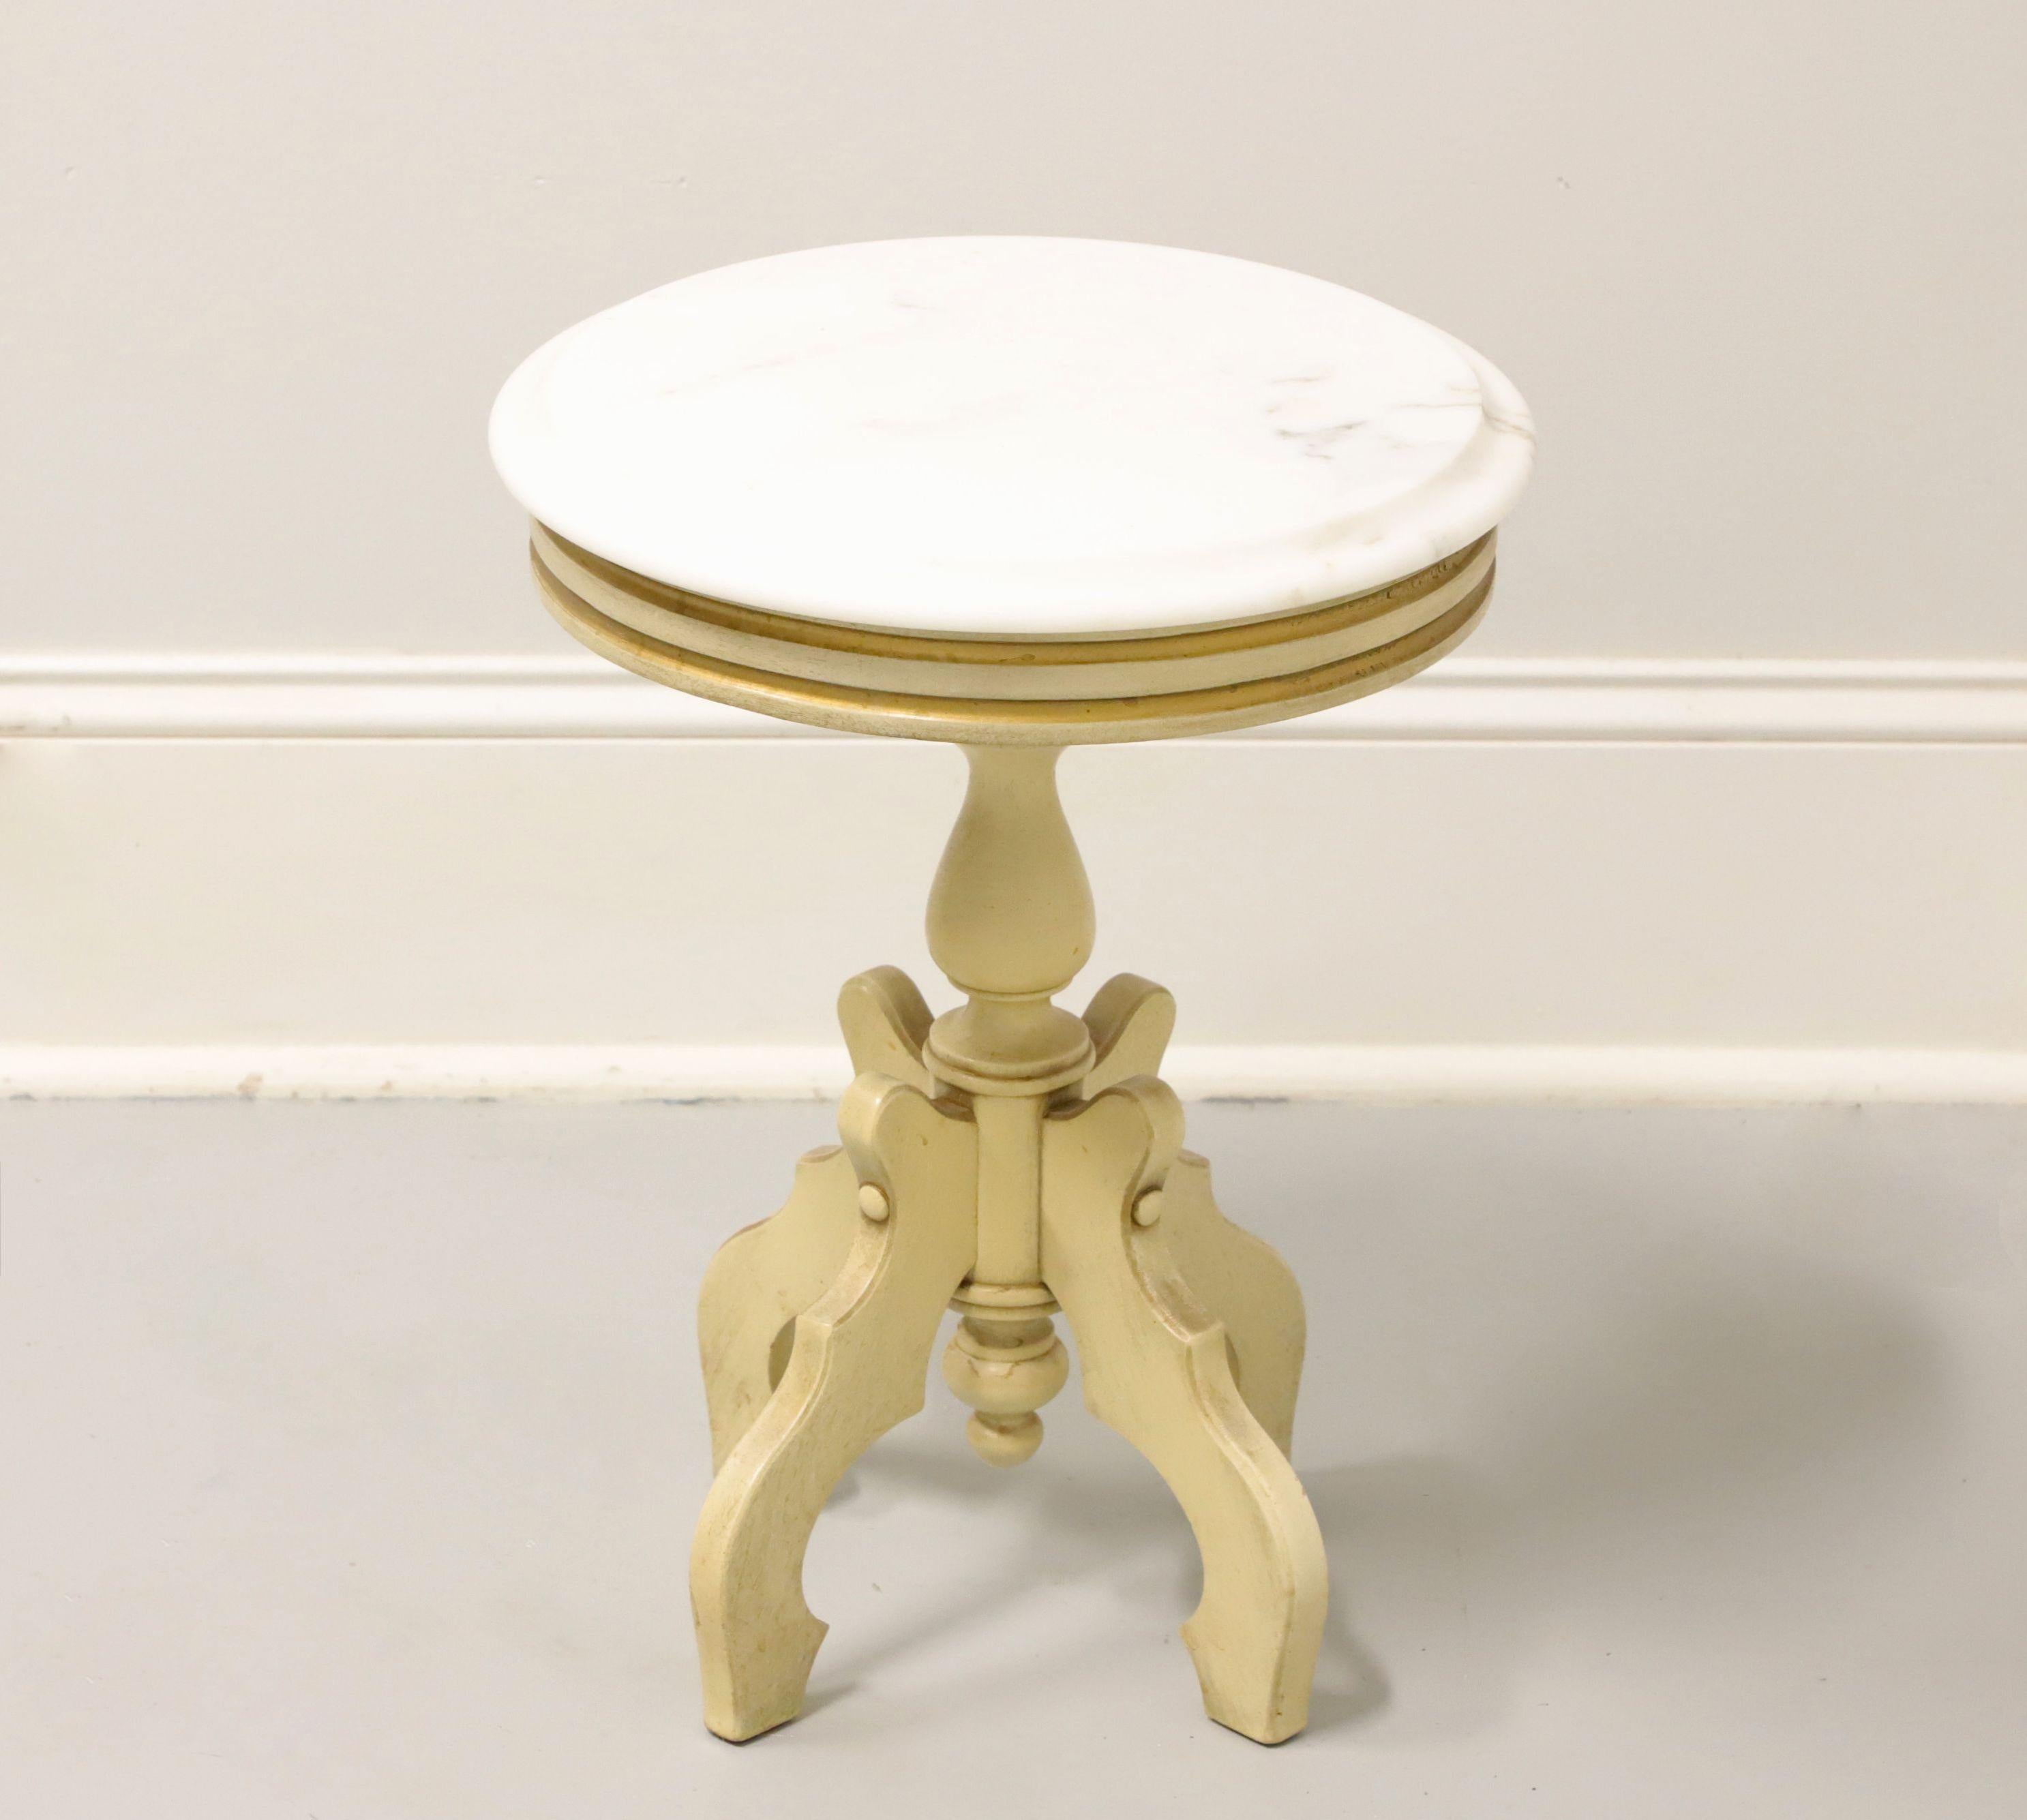 American Antique Early 20th Century Victorian Marble Top Side Table / Plant Stand For Sale